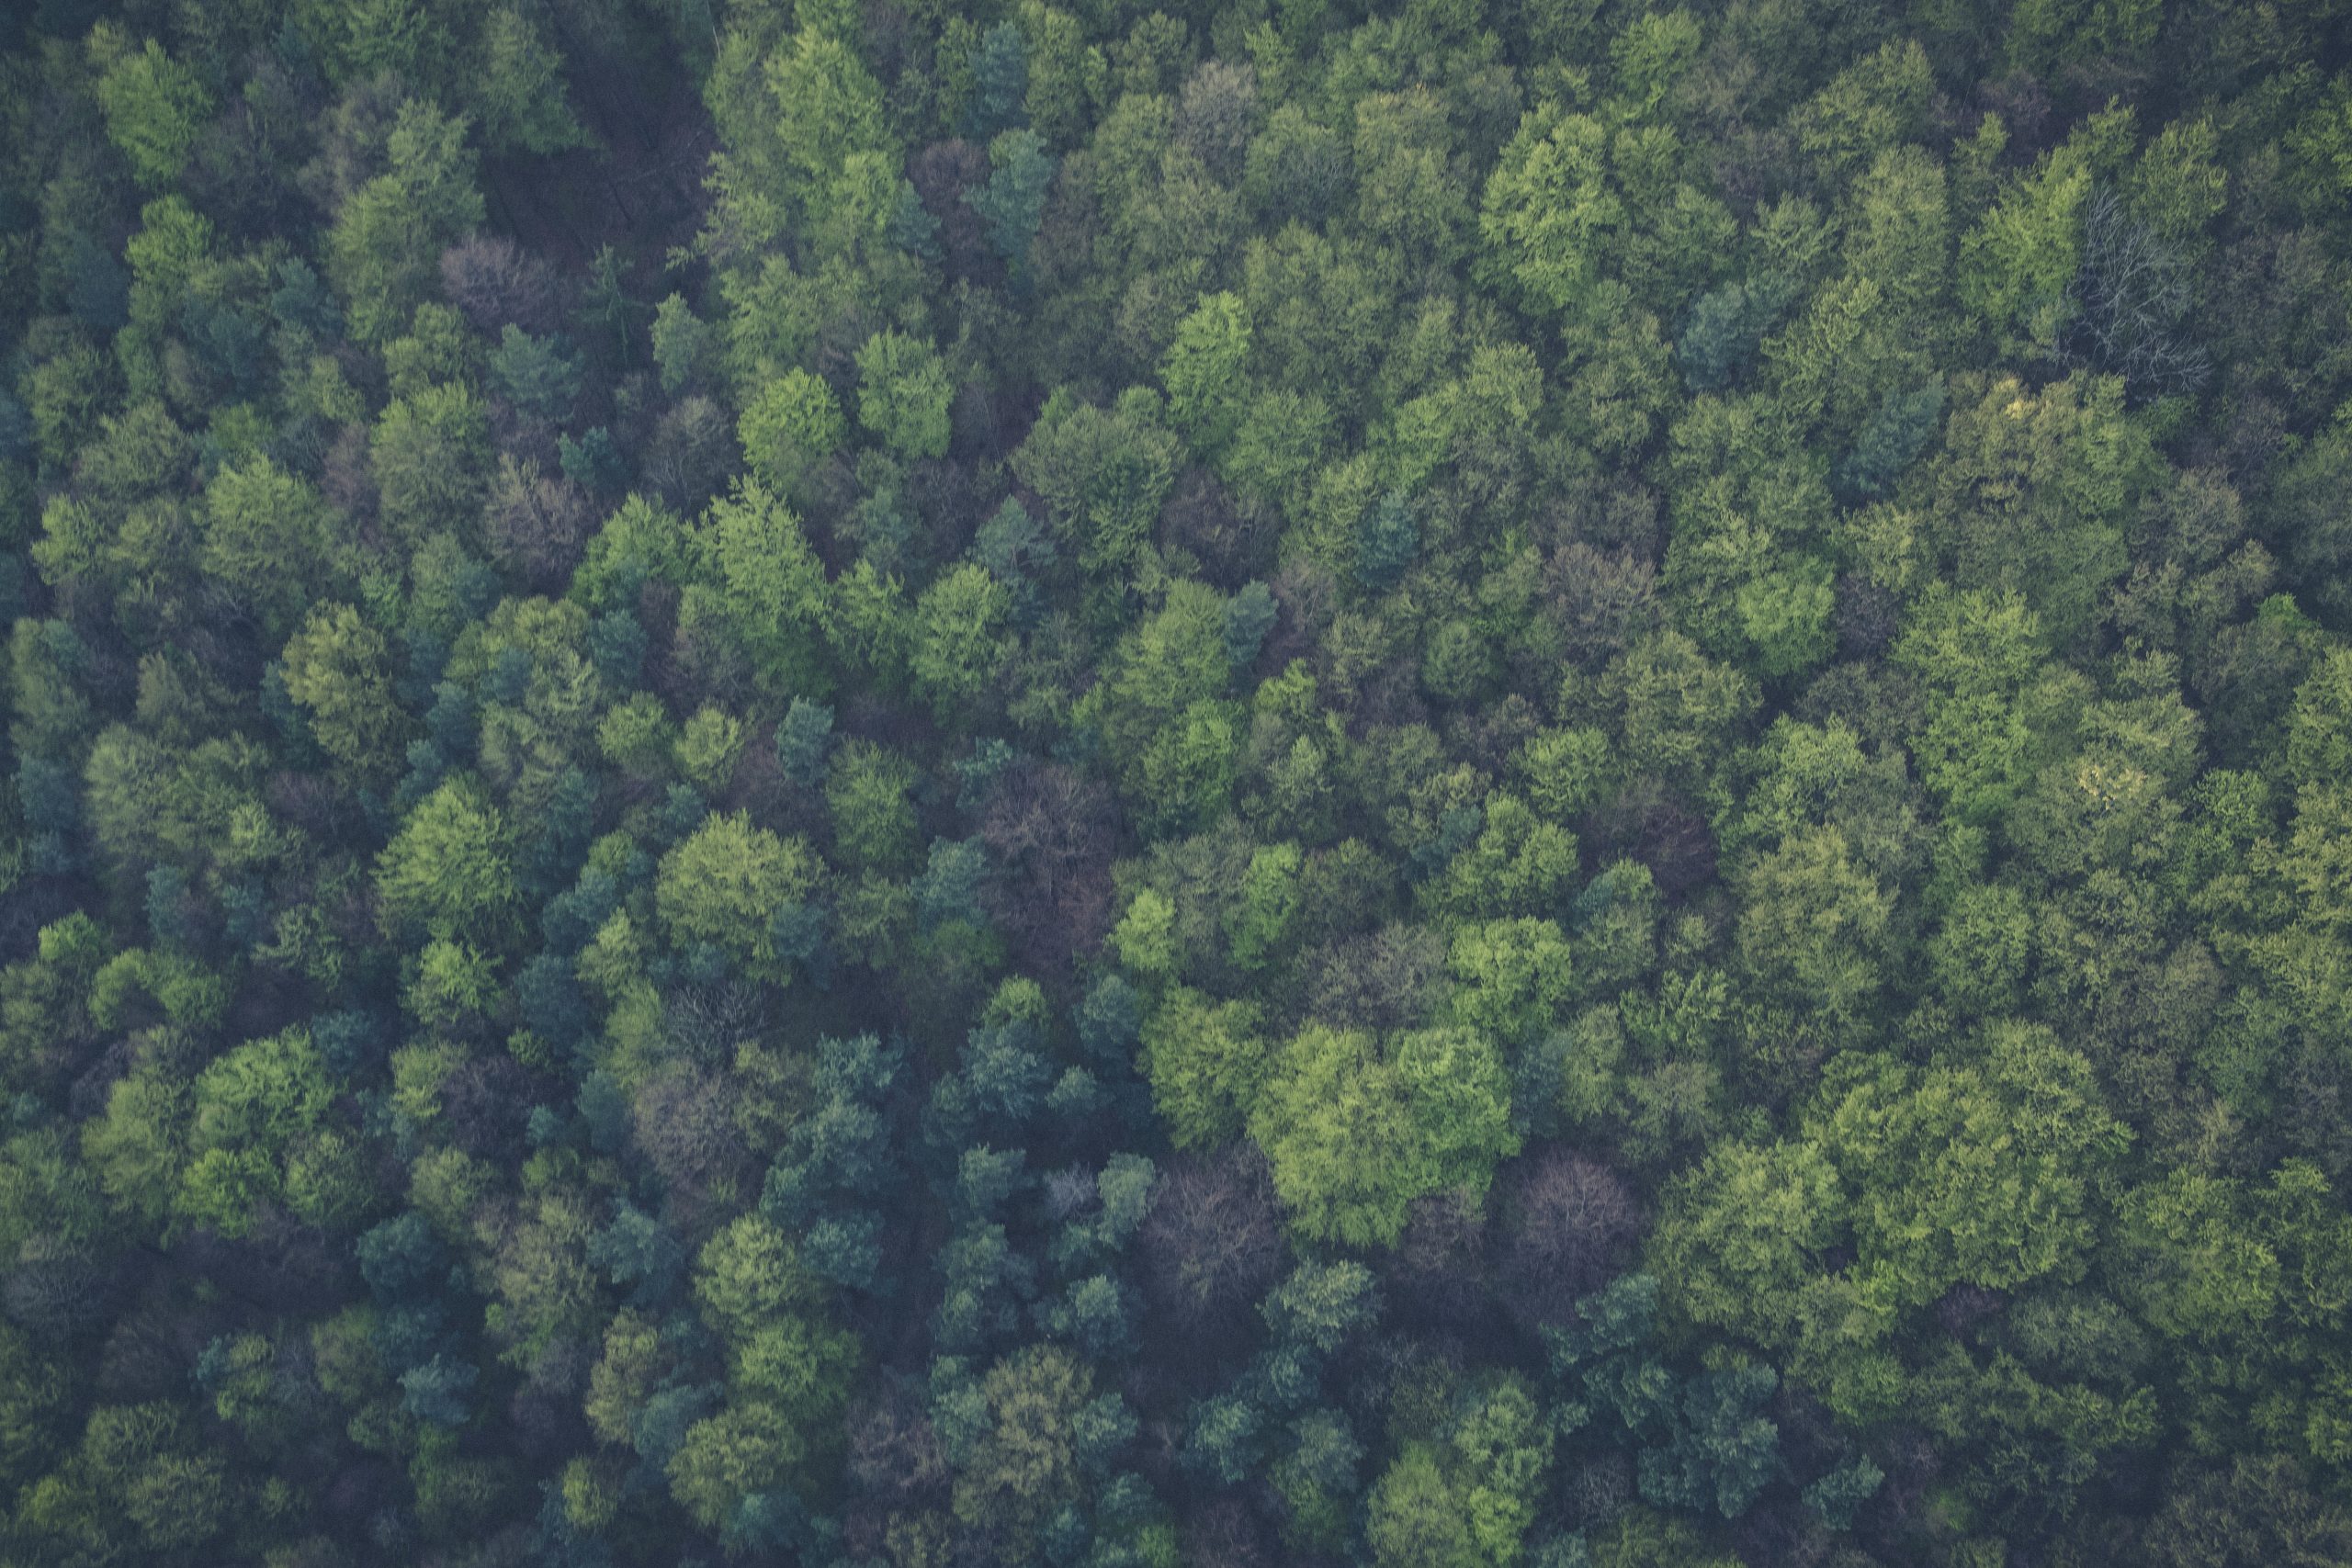 forest of evergreen trees seen from above